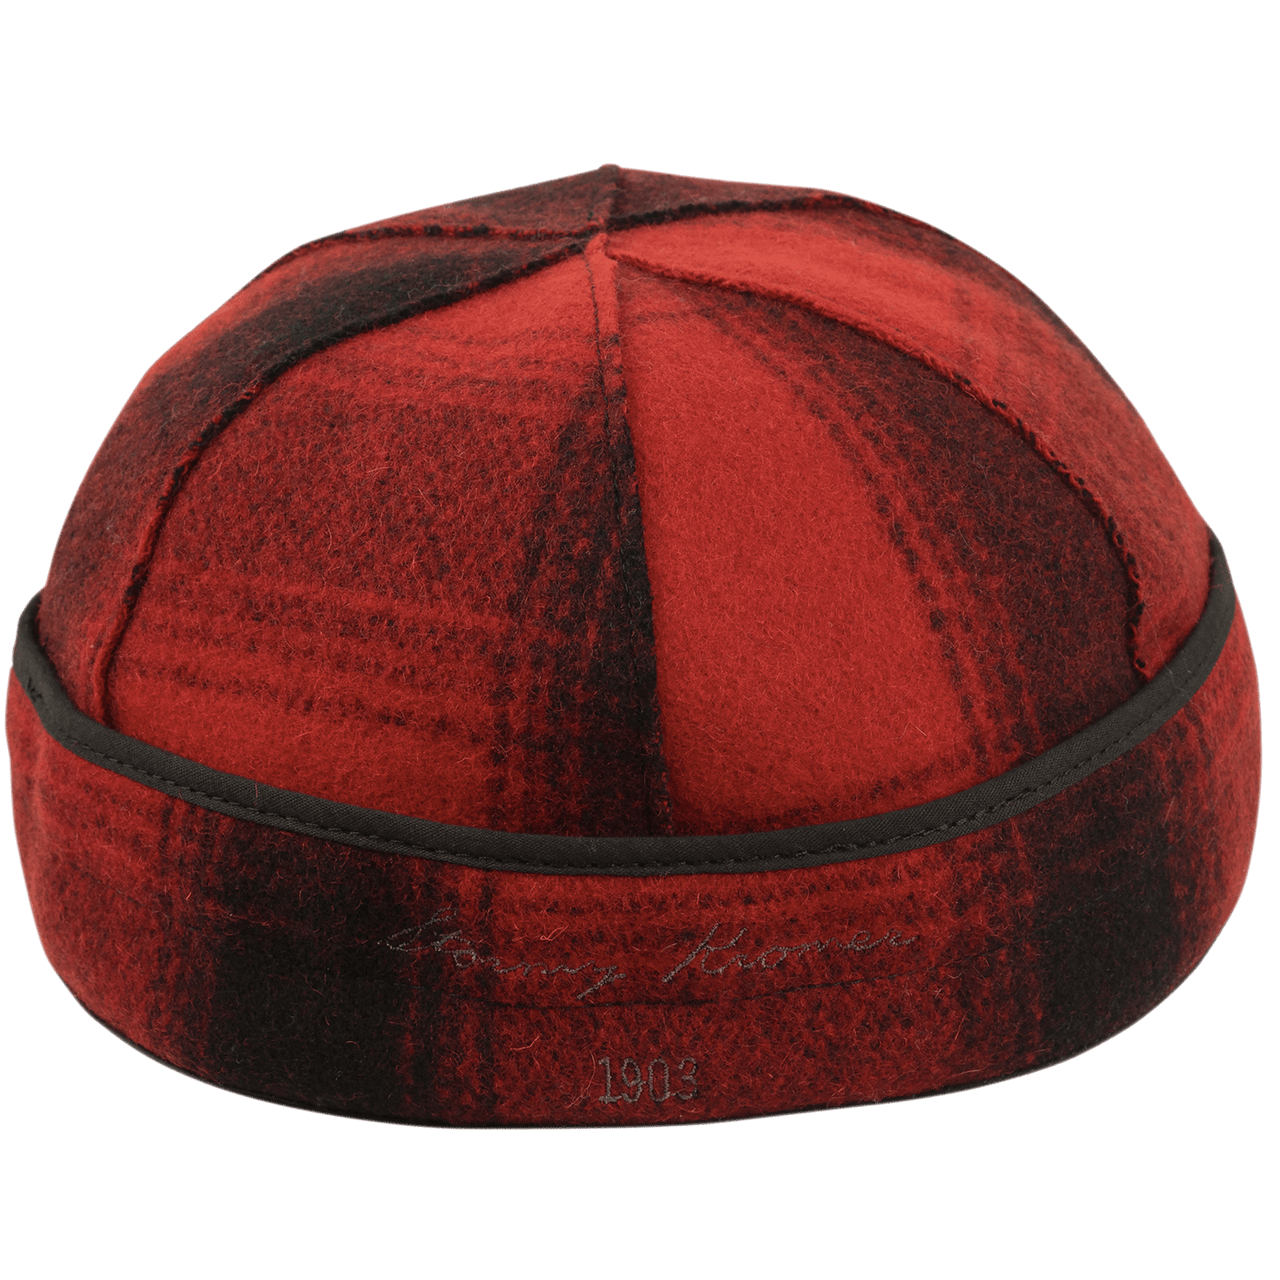 Back View of Stormy Kromer Original Red and black plaid wool hat